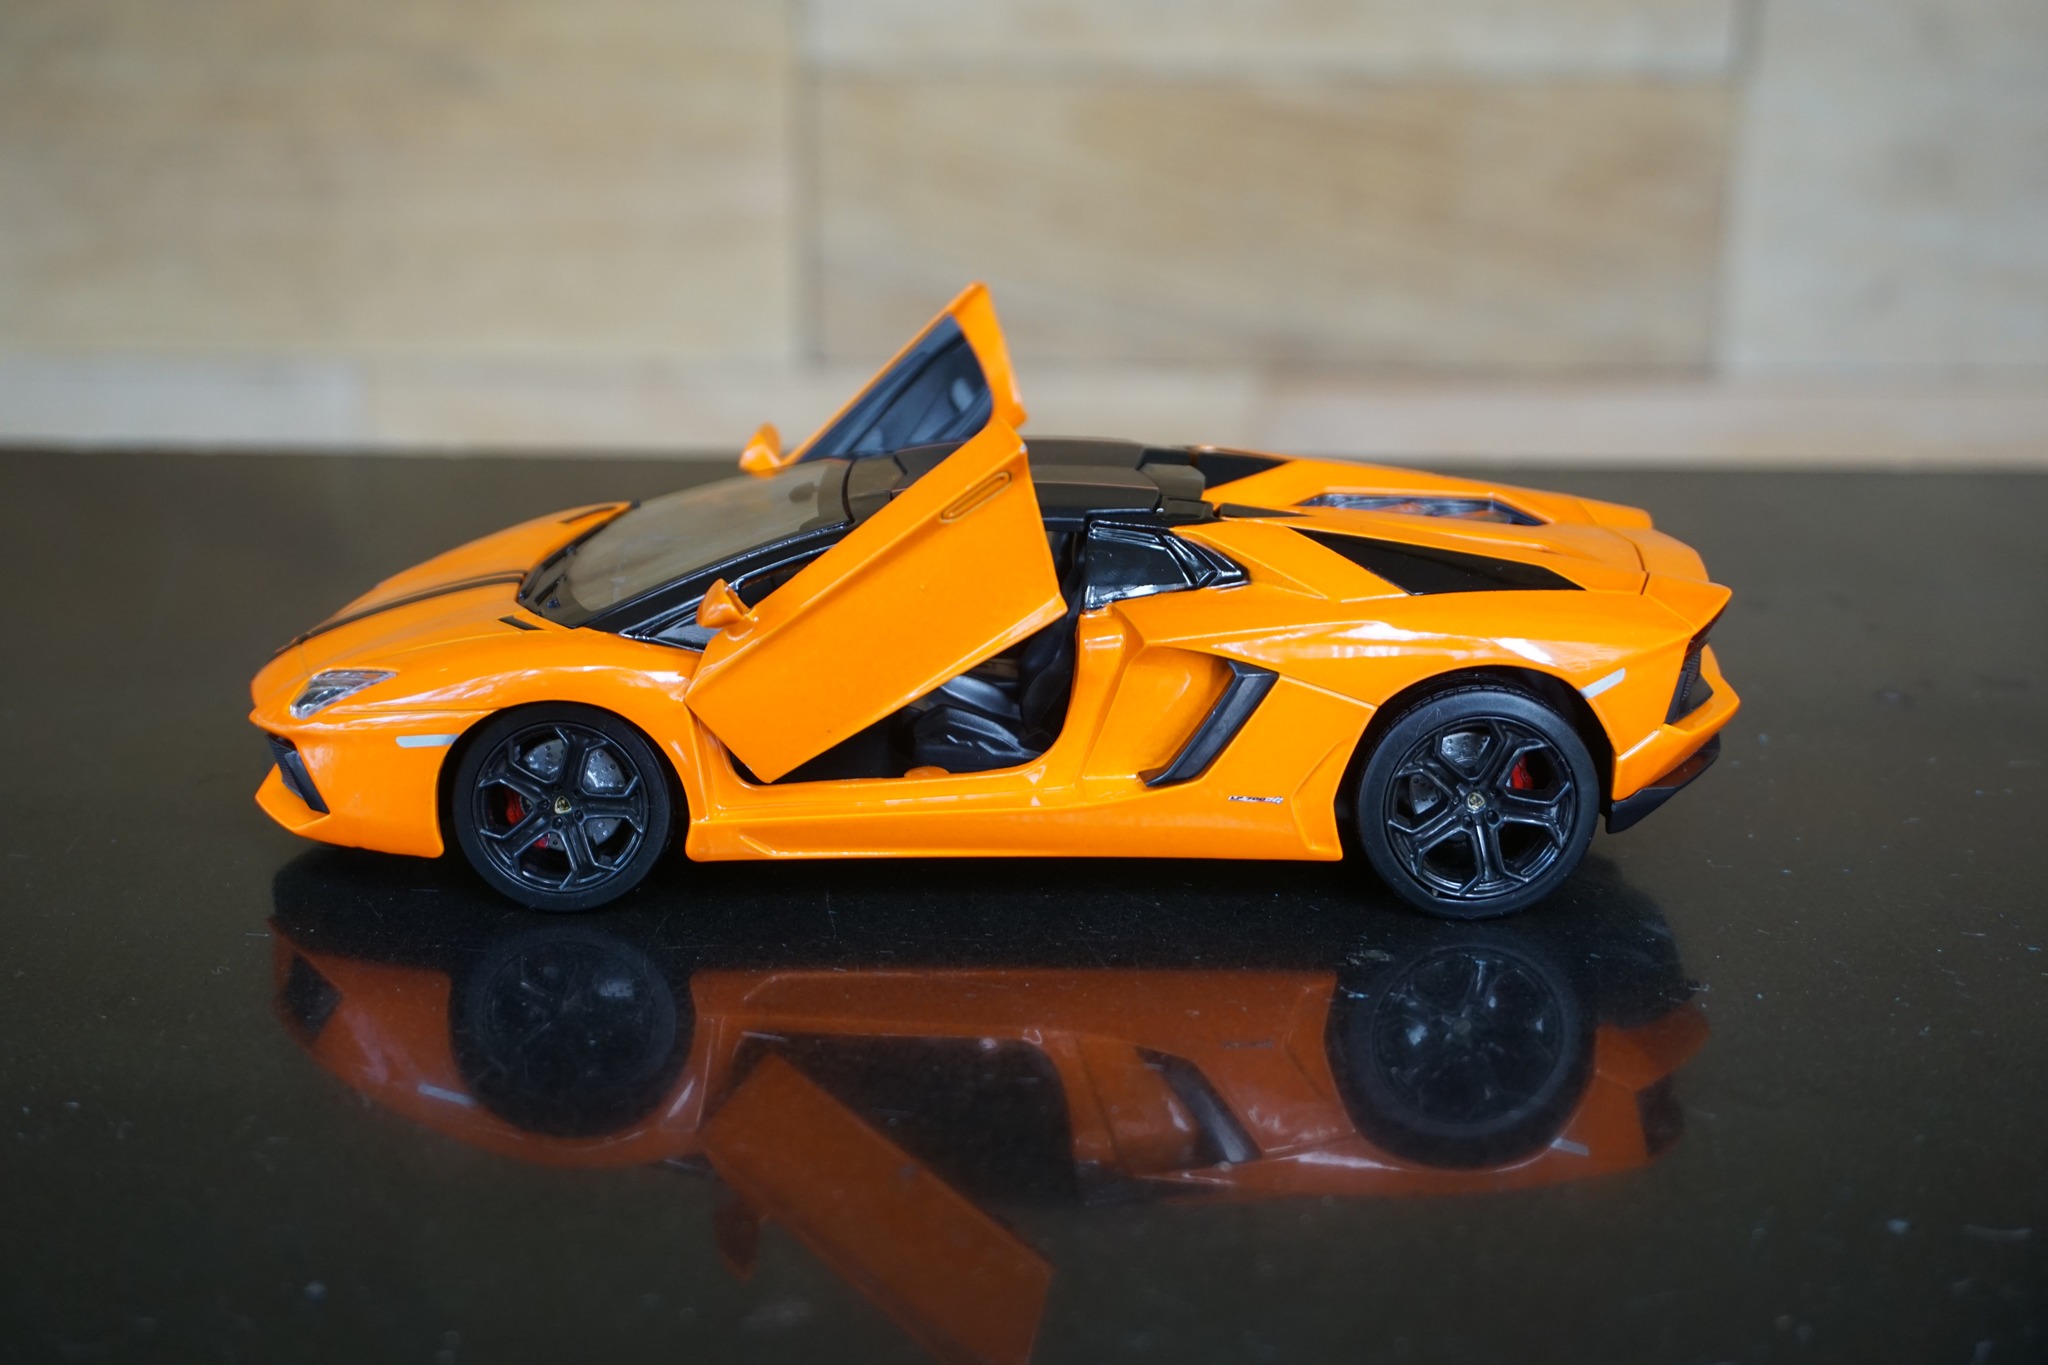 petron toy cars for sale